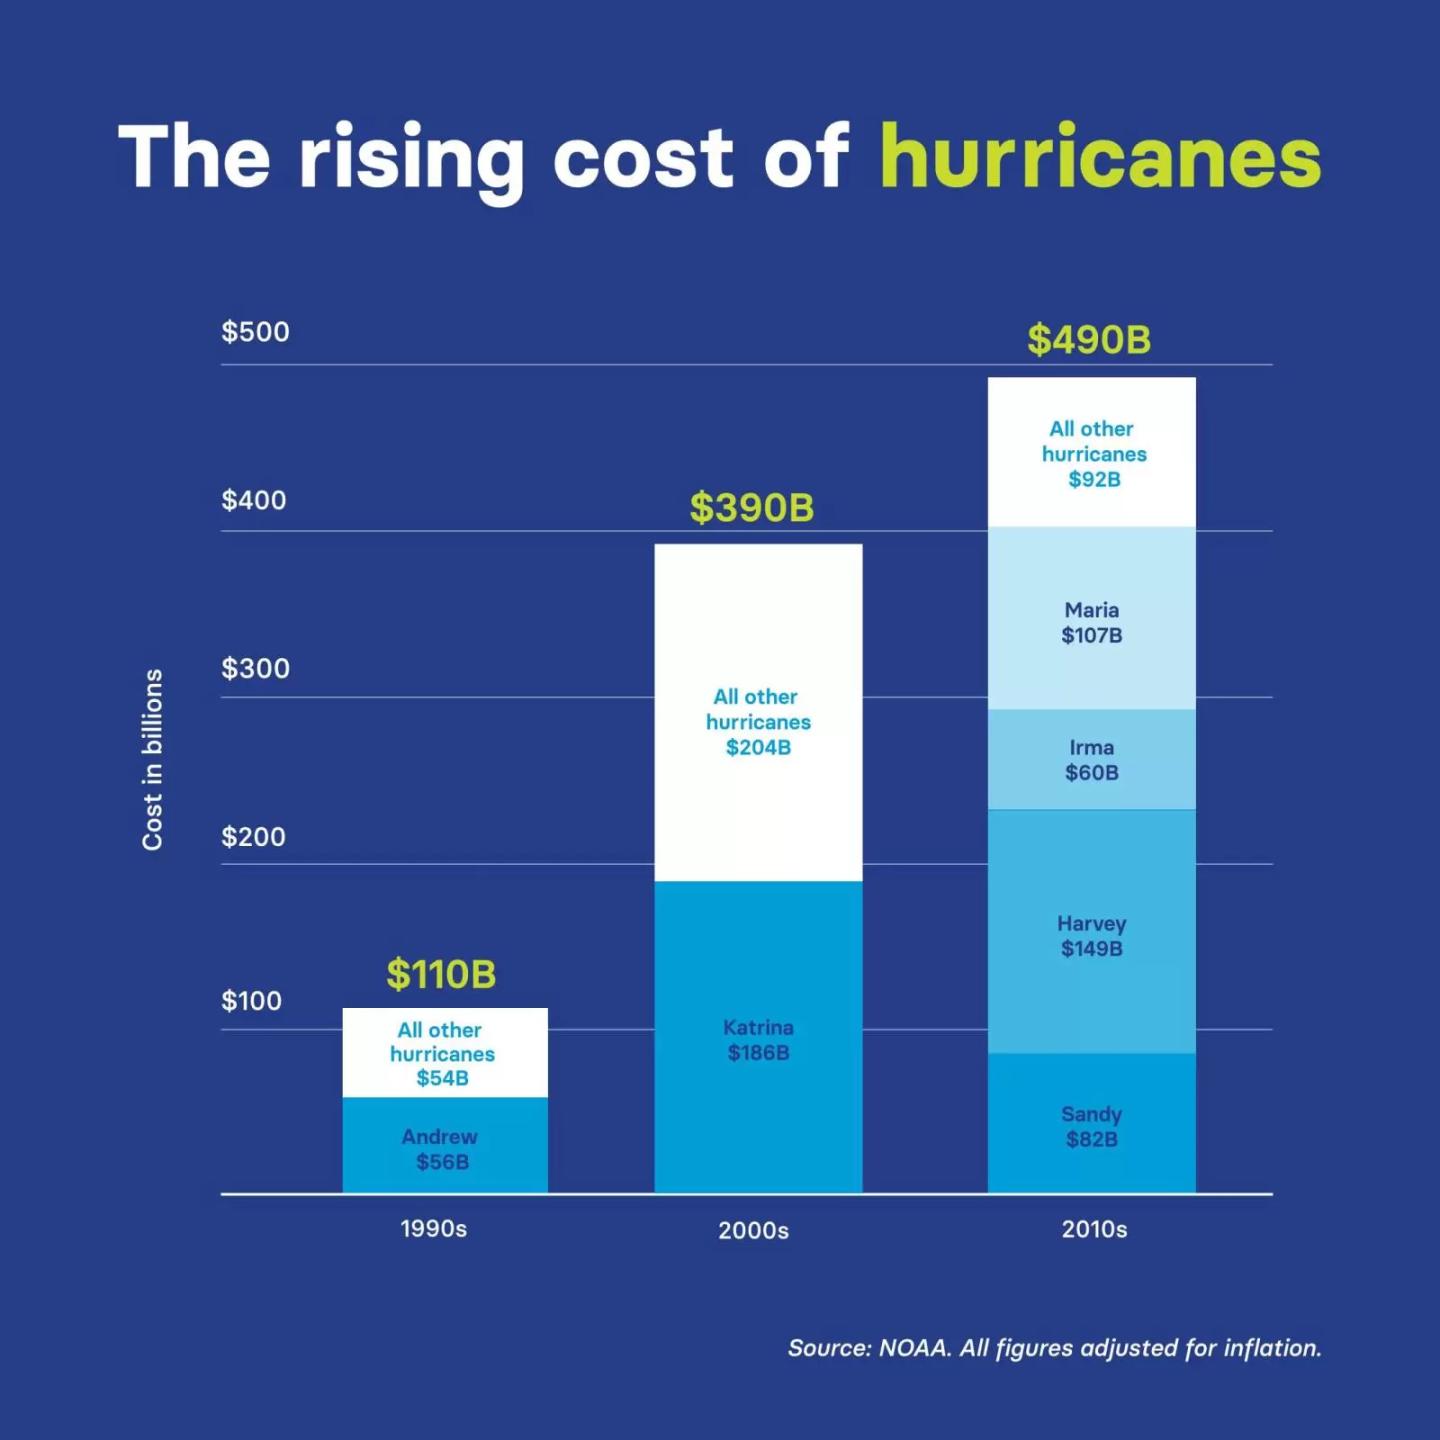 A bar graph showing the rising cost of hurricanes by decade, peaking at $490 billion in the 2010s